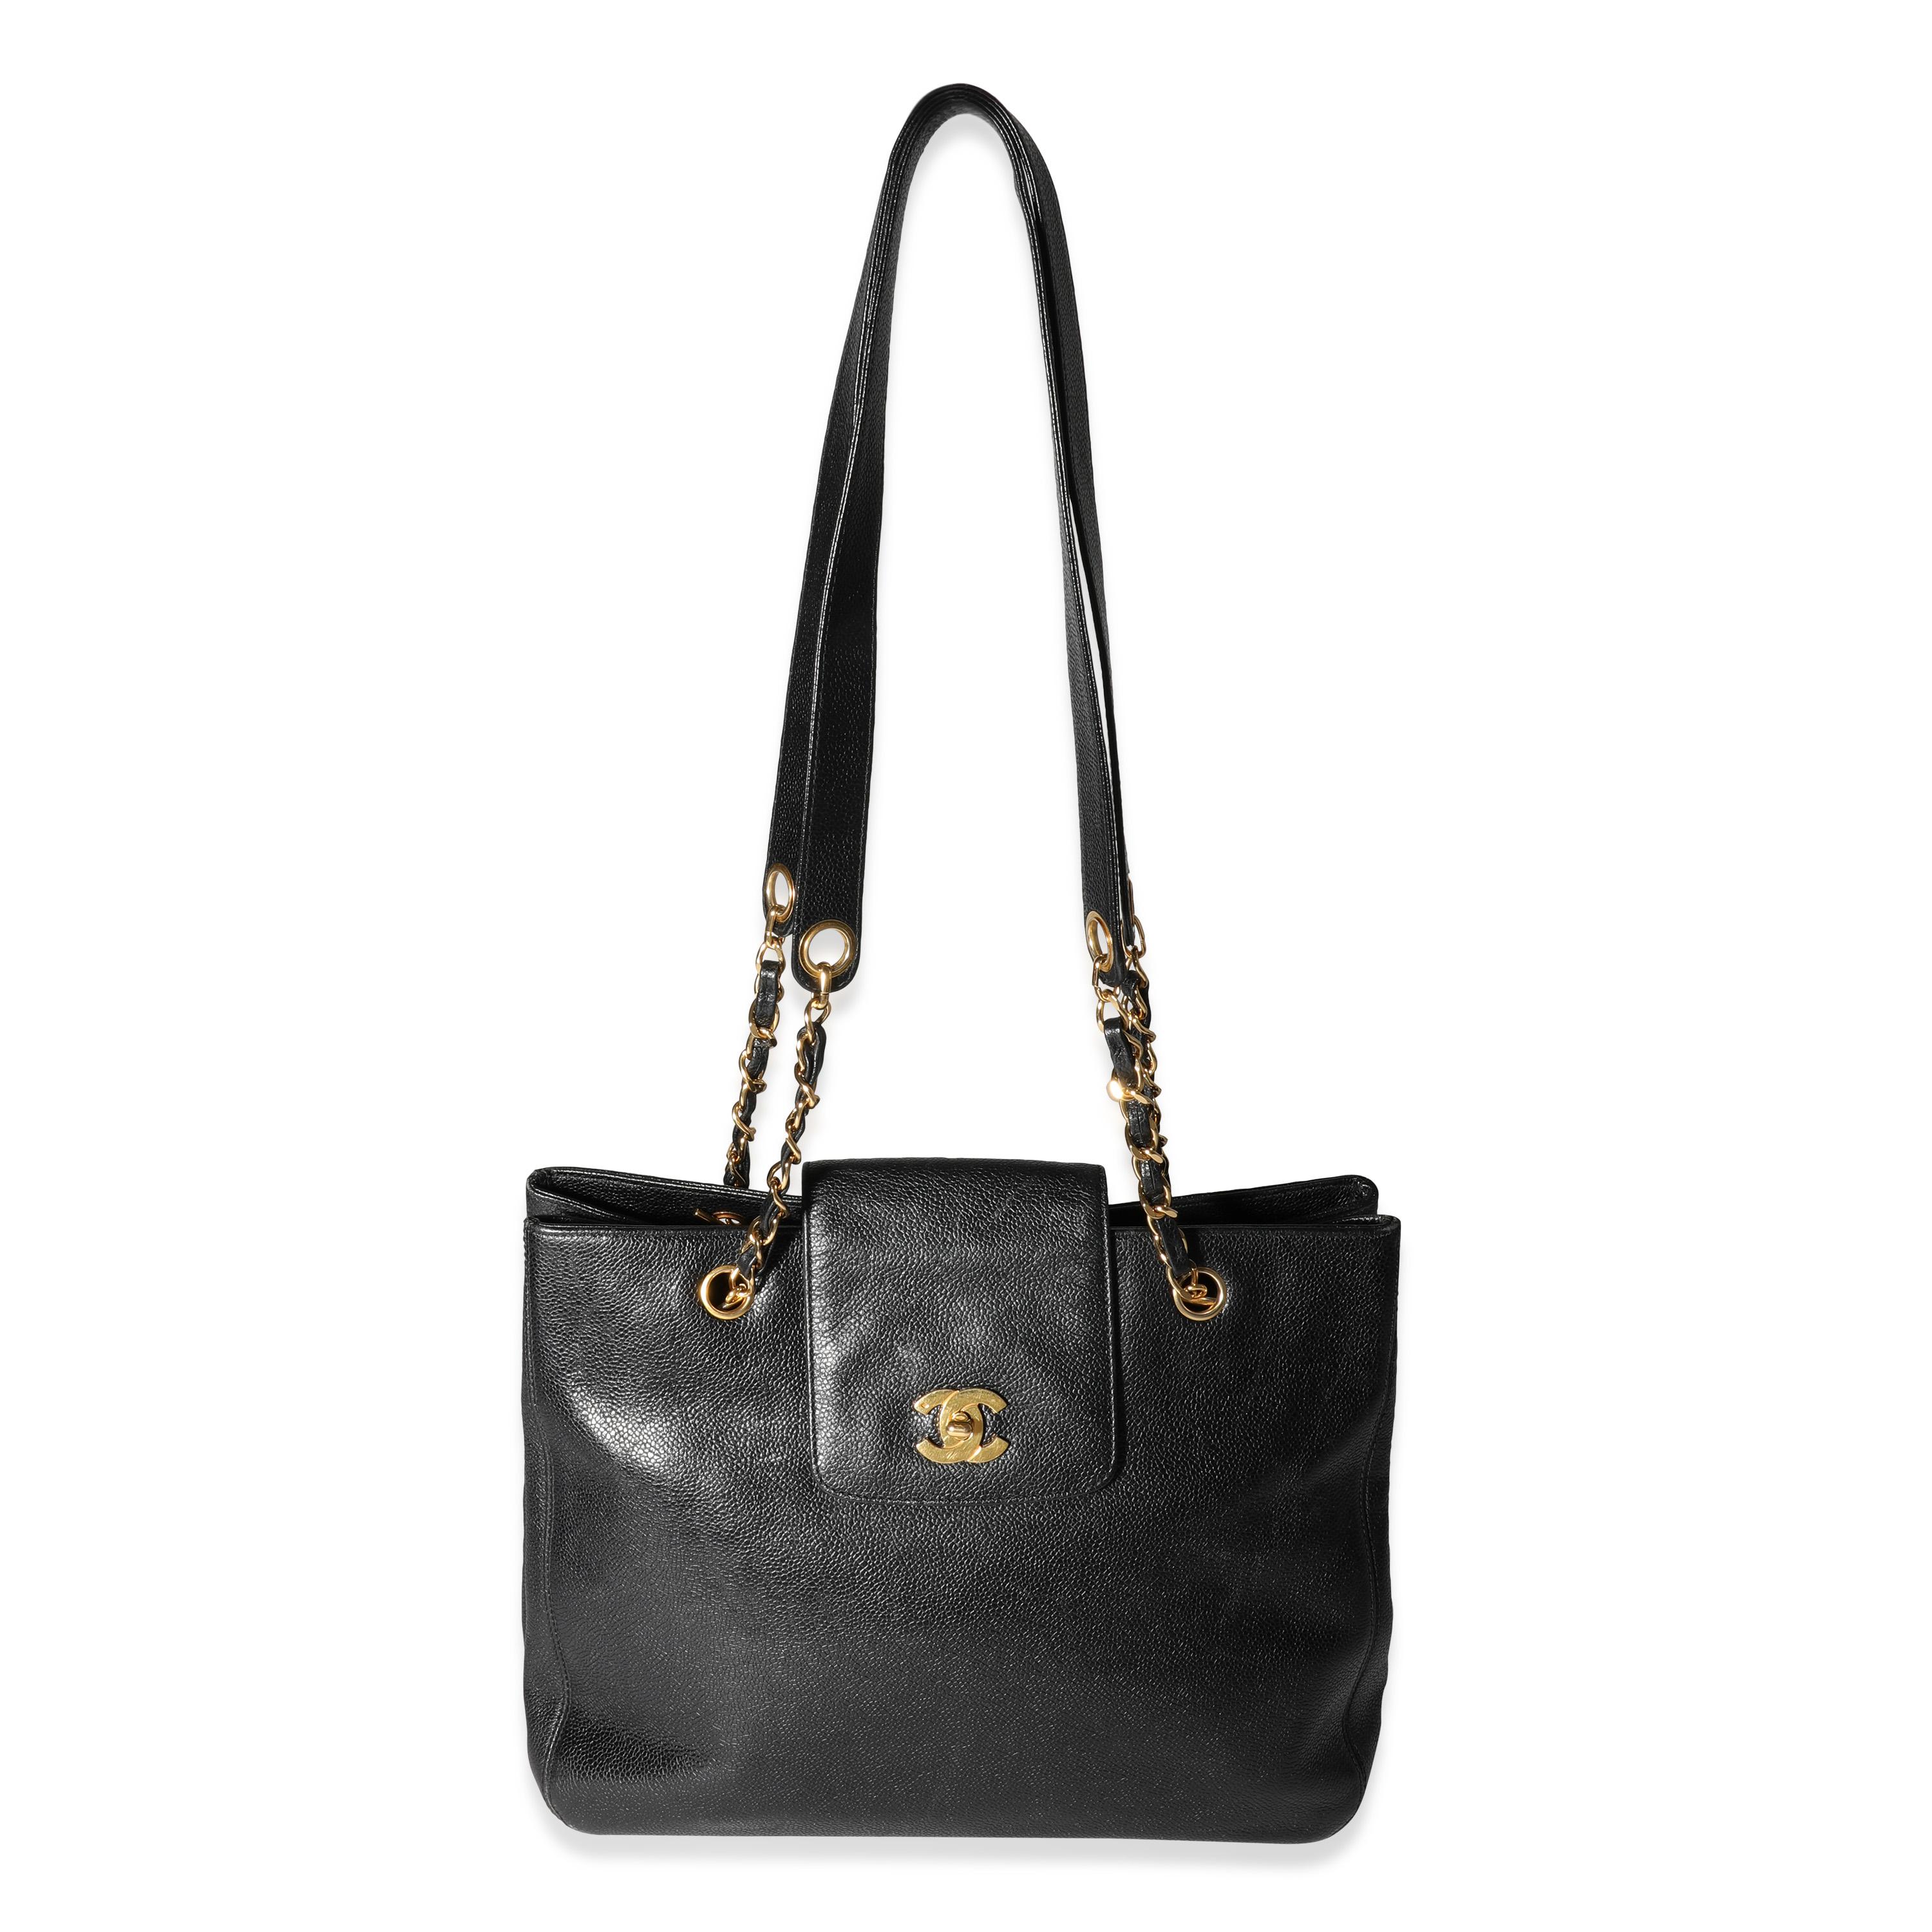 Listing Title: Chanel Vintage Black Caviar Supermodel Tote
SKU: 118095
Condition: Pre-owned (3000)
Handbag Condition: Very Good
Condition Comments: Very Good Condition. Scuffing to corners. Scuffing throughout exterior. Scratching and tarnishing to